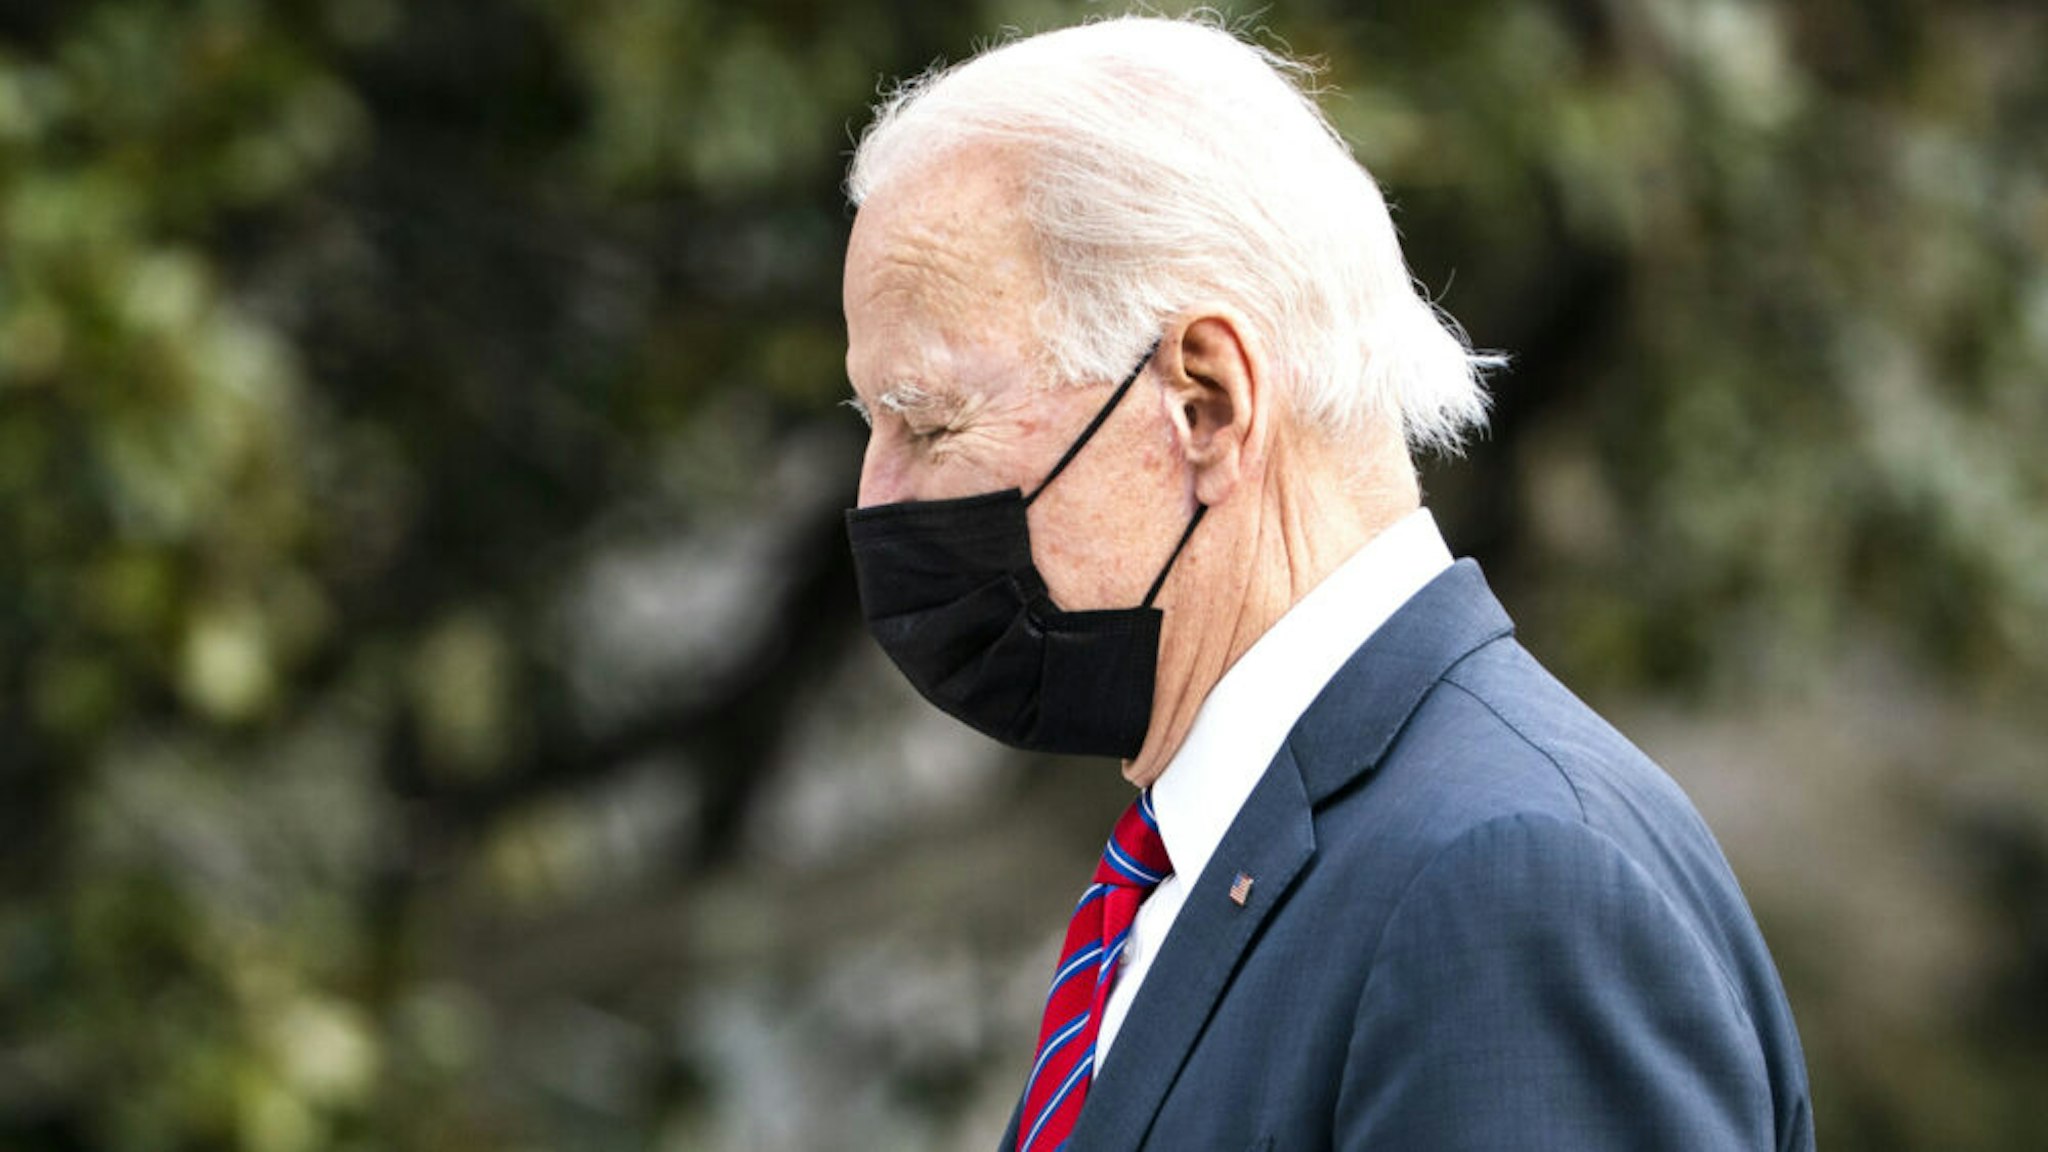 U.S. President Joe Biden walks on the South Lawn of the White House after arriving on Marine One in Washington, D.C., U.S., on Friday, Jan. 29, 2021. Biden moved to make it easier for Americans to buy health insurance during the pandemic, reopening the federal Obamacare marketplace with an order Thursday that's a step toward reinvigorating a program his predecessor tried to eliminate.